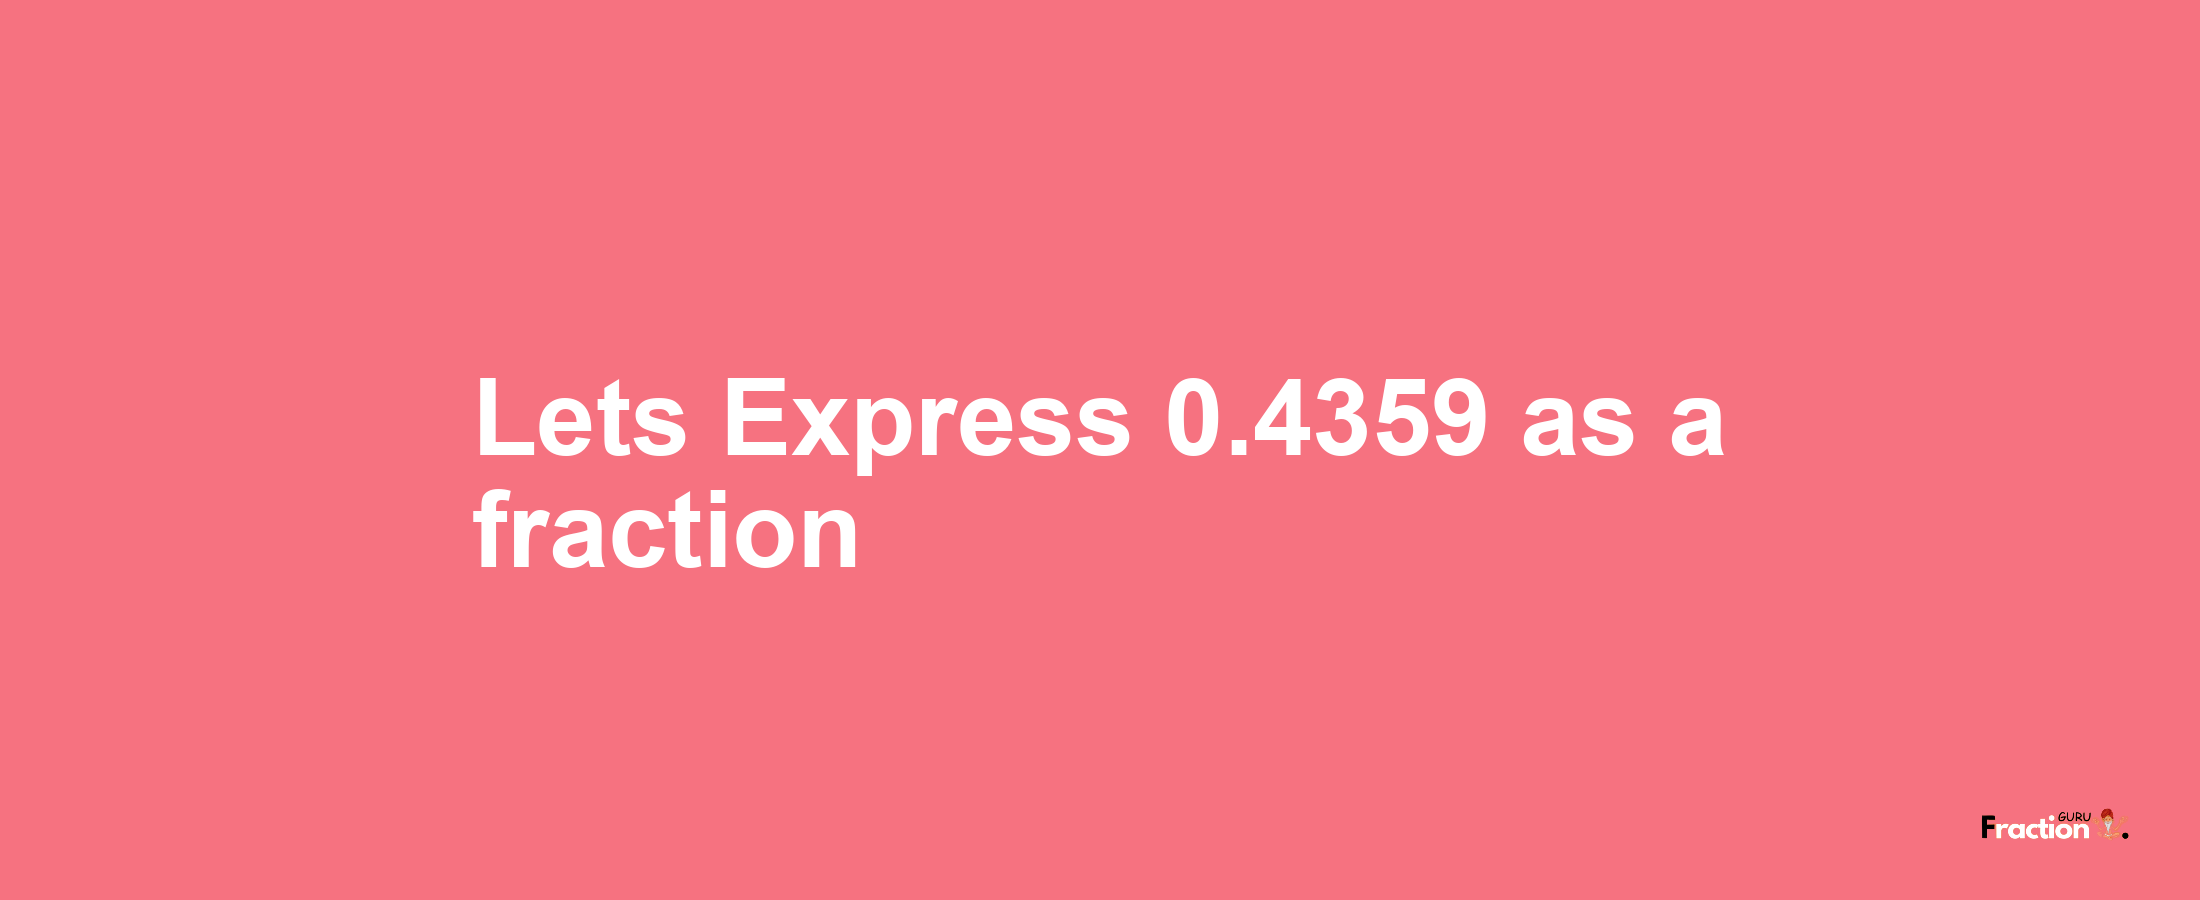 Lets Express 0.4359 as afraction